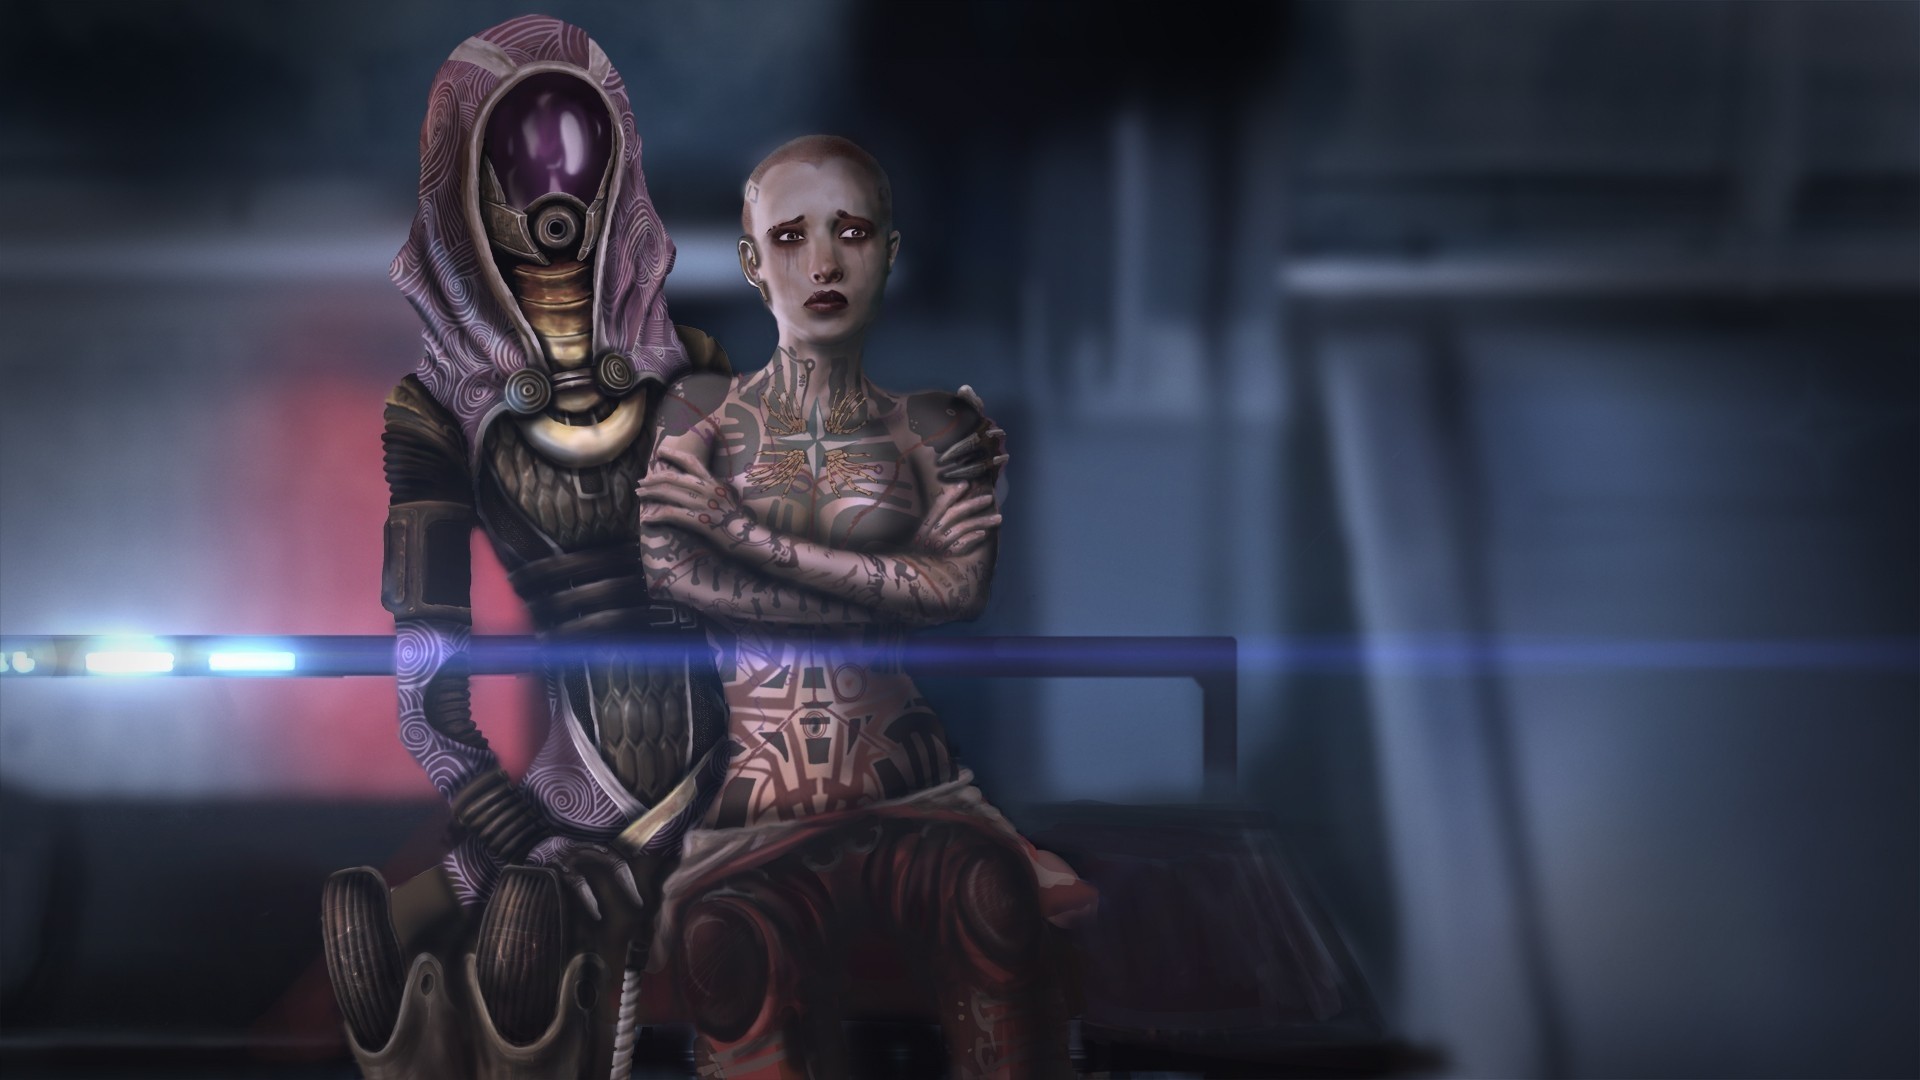 1920x1080 Pictures Download Mass Effect Wallpaper HD.